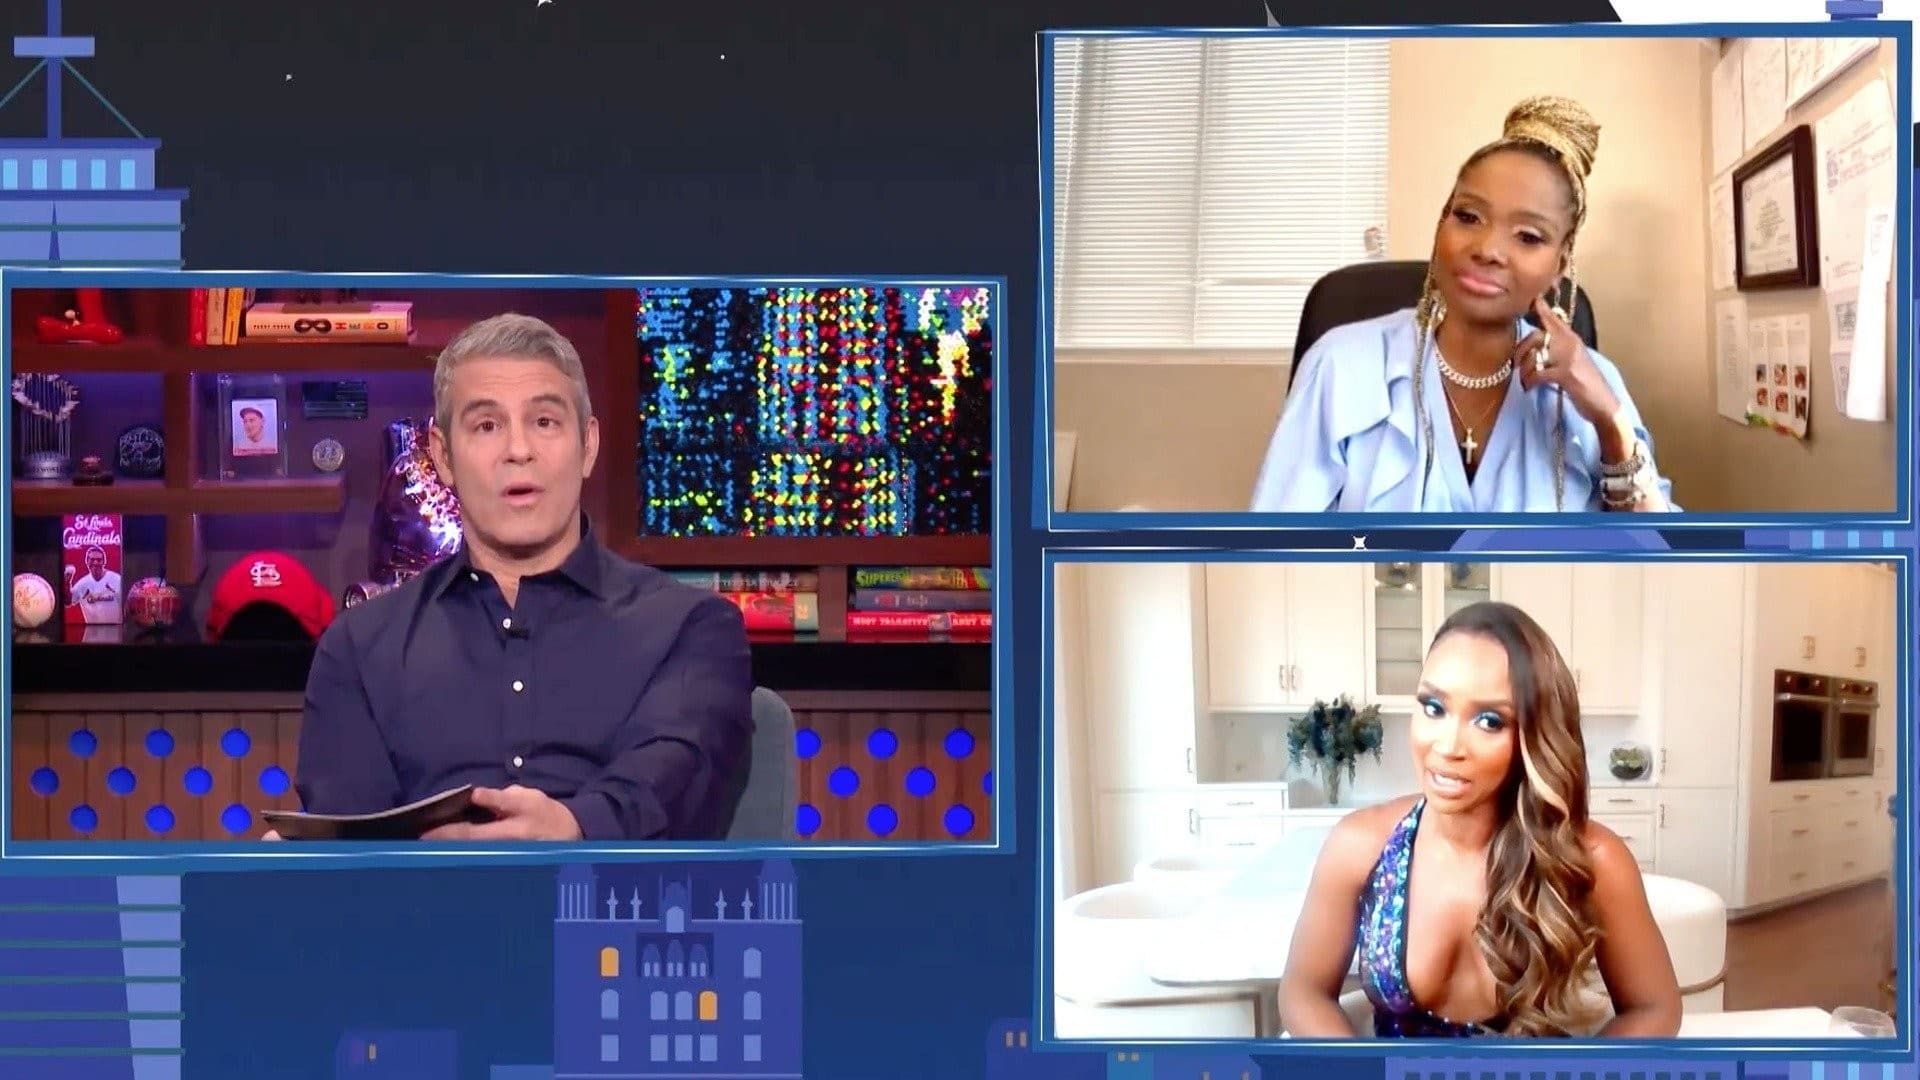 Watch What Happens Live with Andy Cohen Staffel 18 :Folge 60 